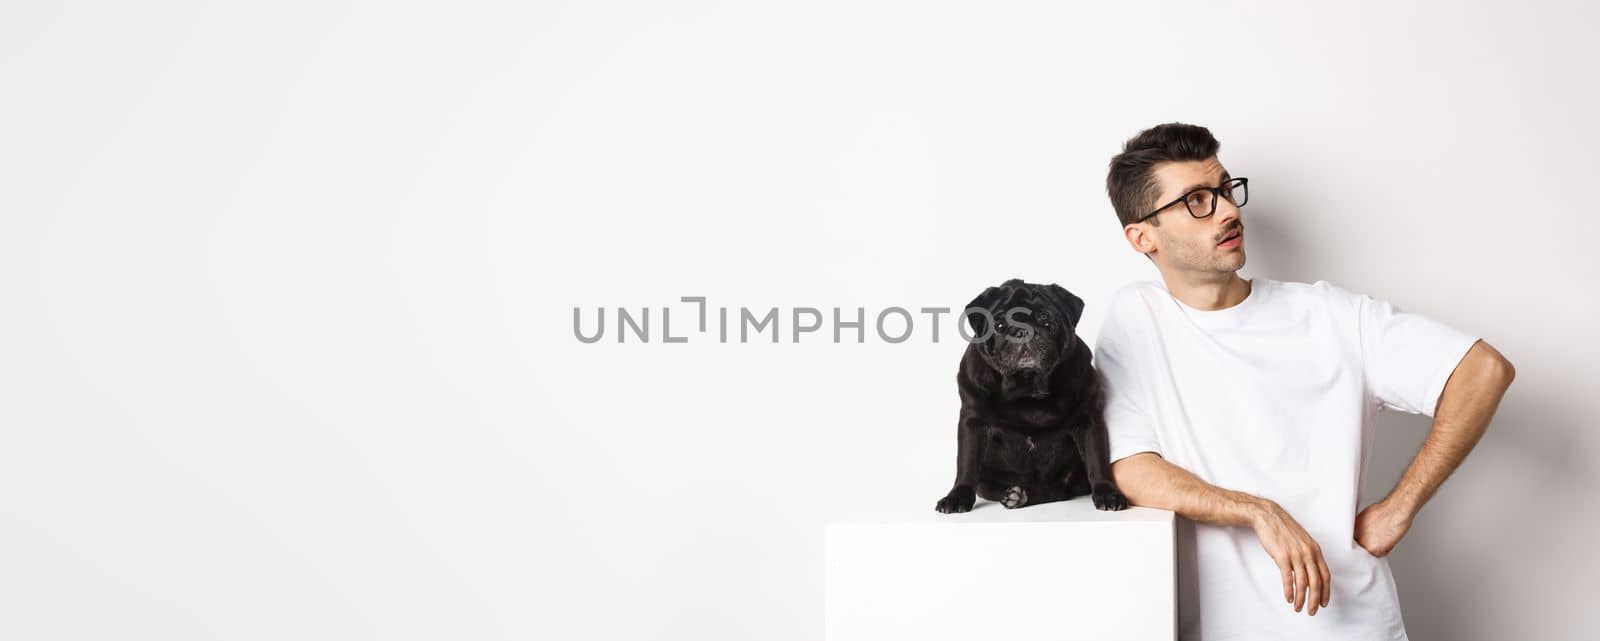 Handsome young man standing near cute black pug, looking right with arrogant expression, standing over white background.